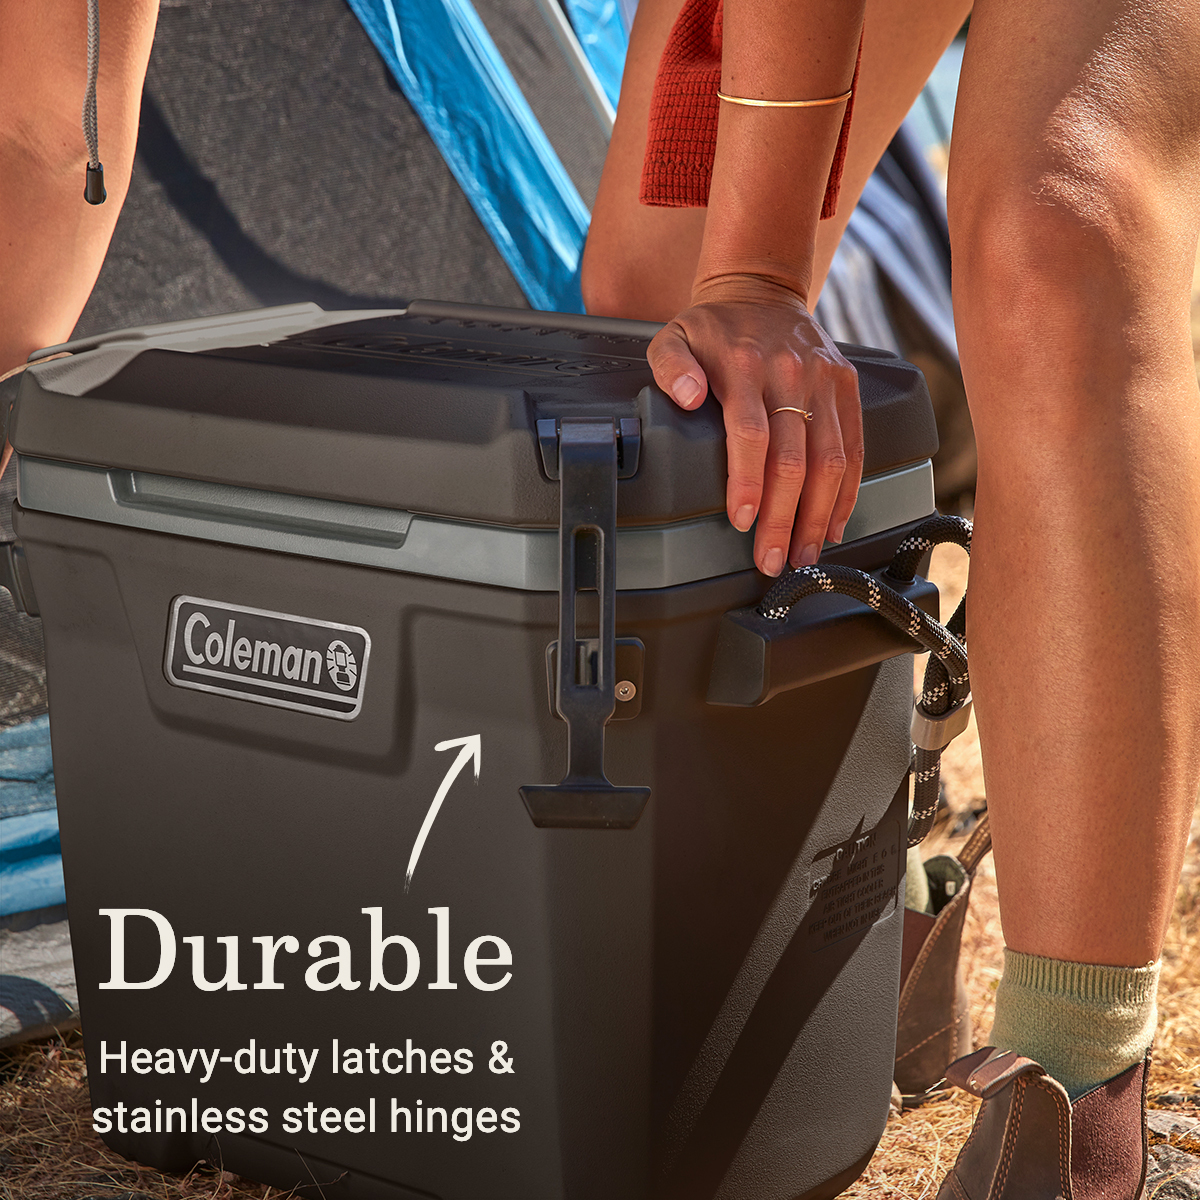 Coleman Convoy High Performance Series 28qt Hard Ice Chest Cooler, Brown, 17.75"' x'13.25" x 19.5" - image 4 of 11